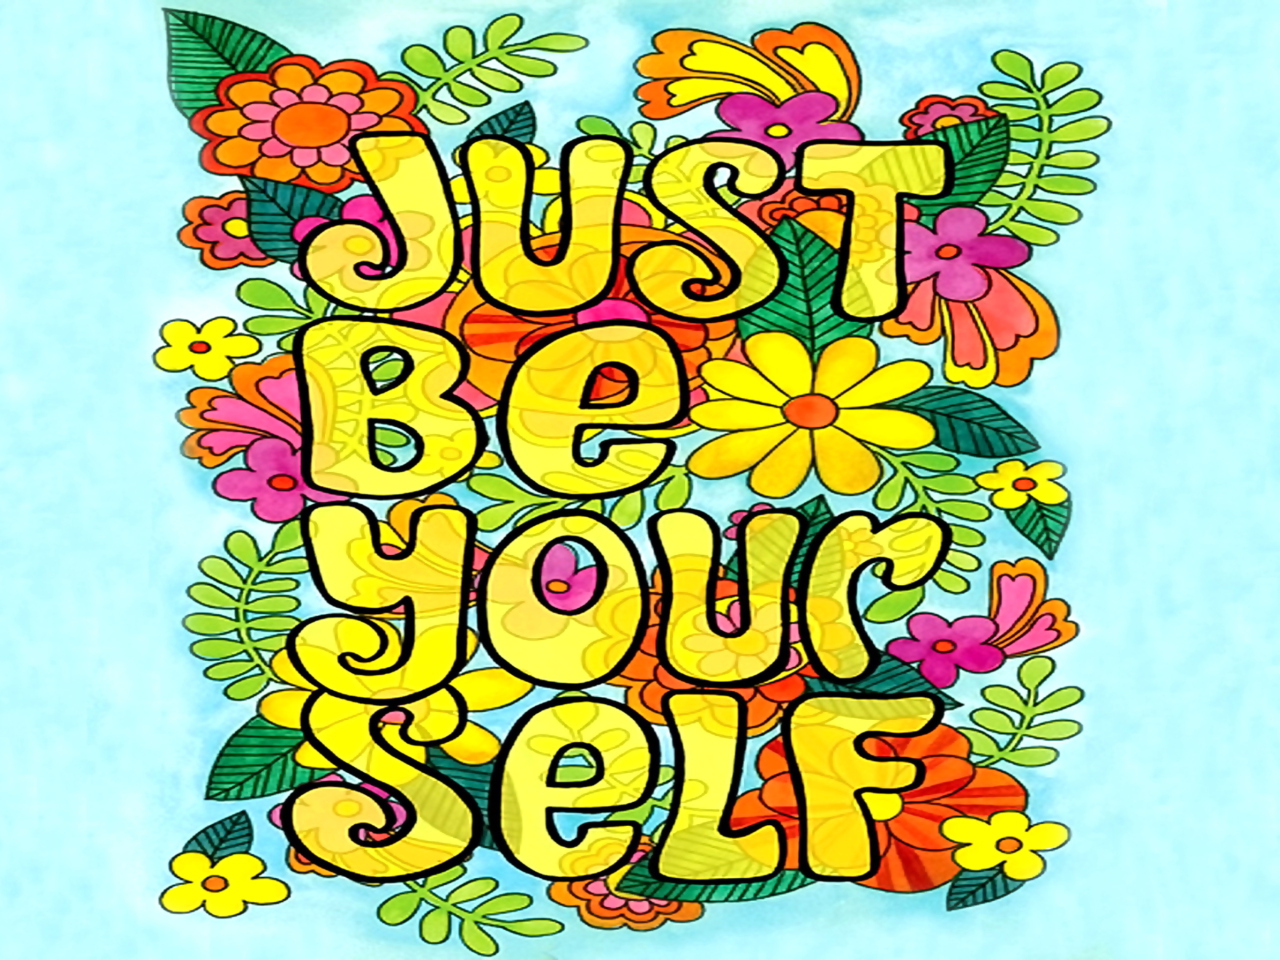 Das Just Be Yourself Wallpaper 1280x960